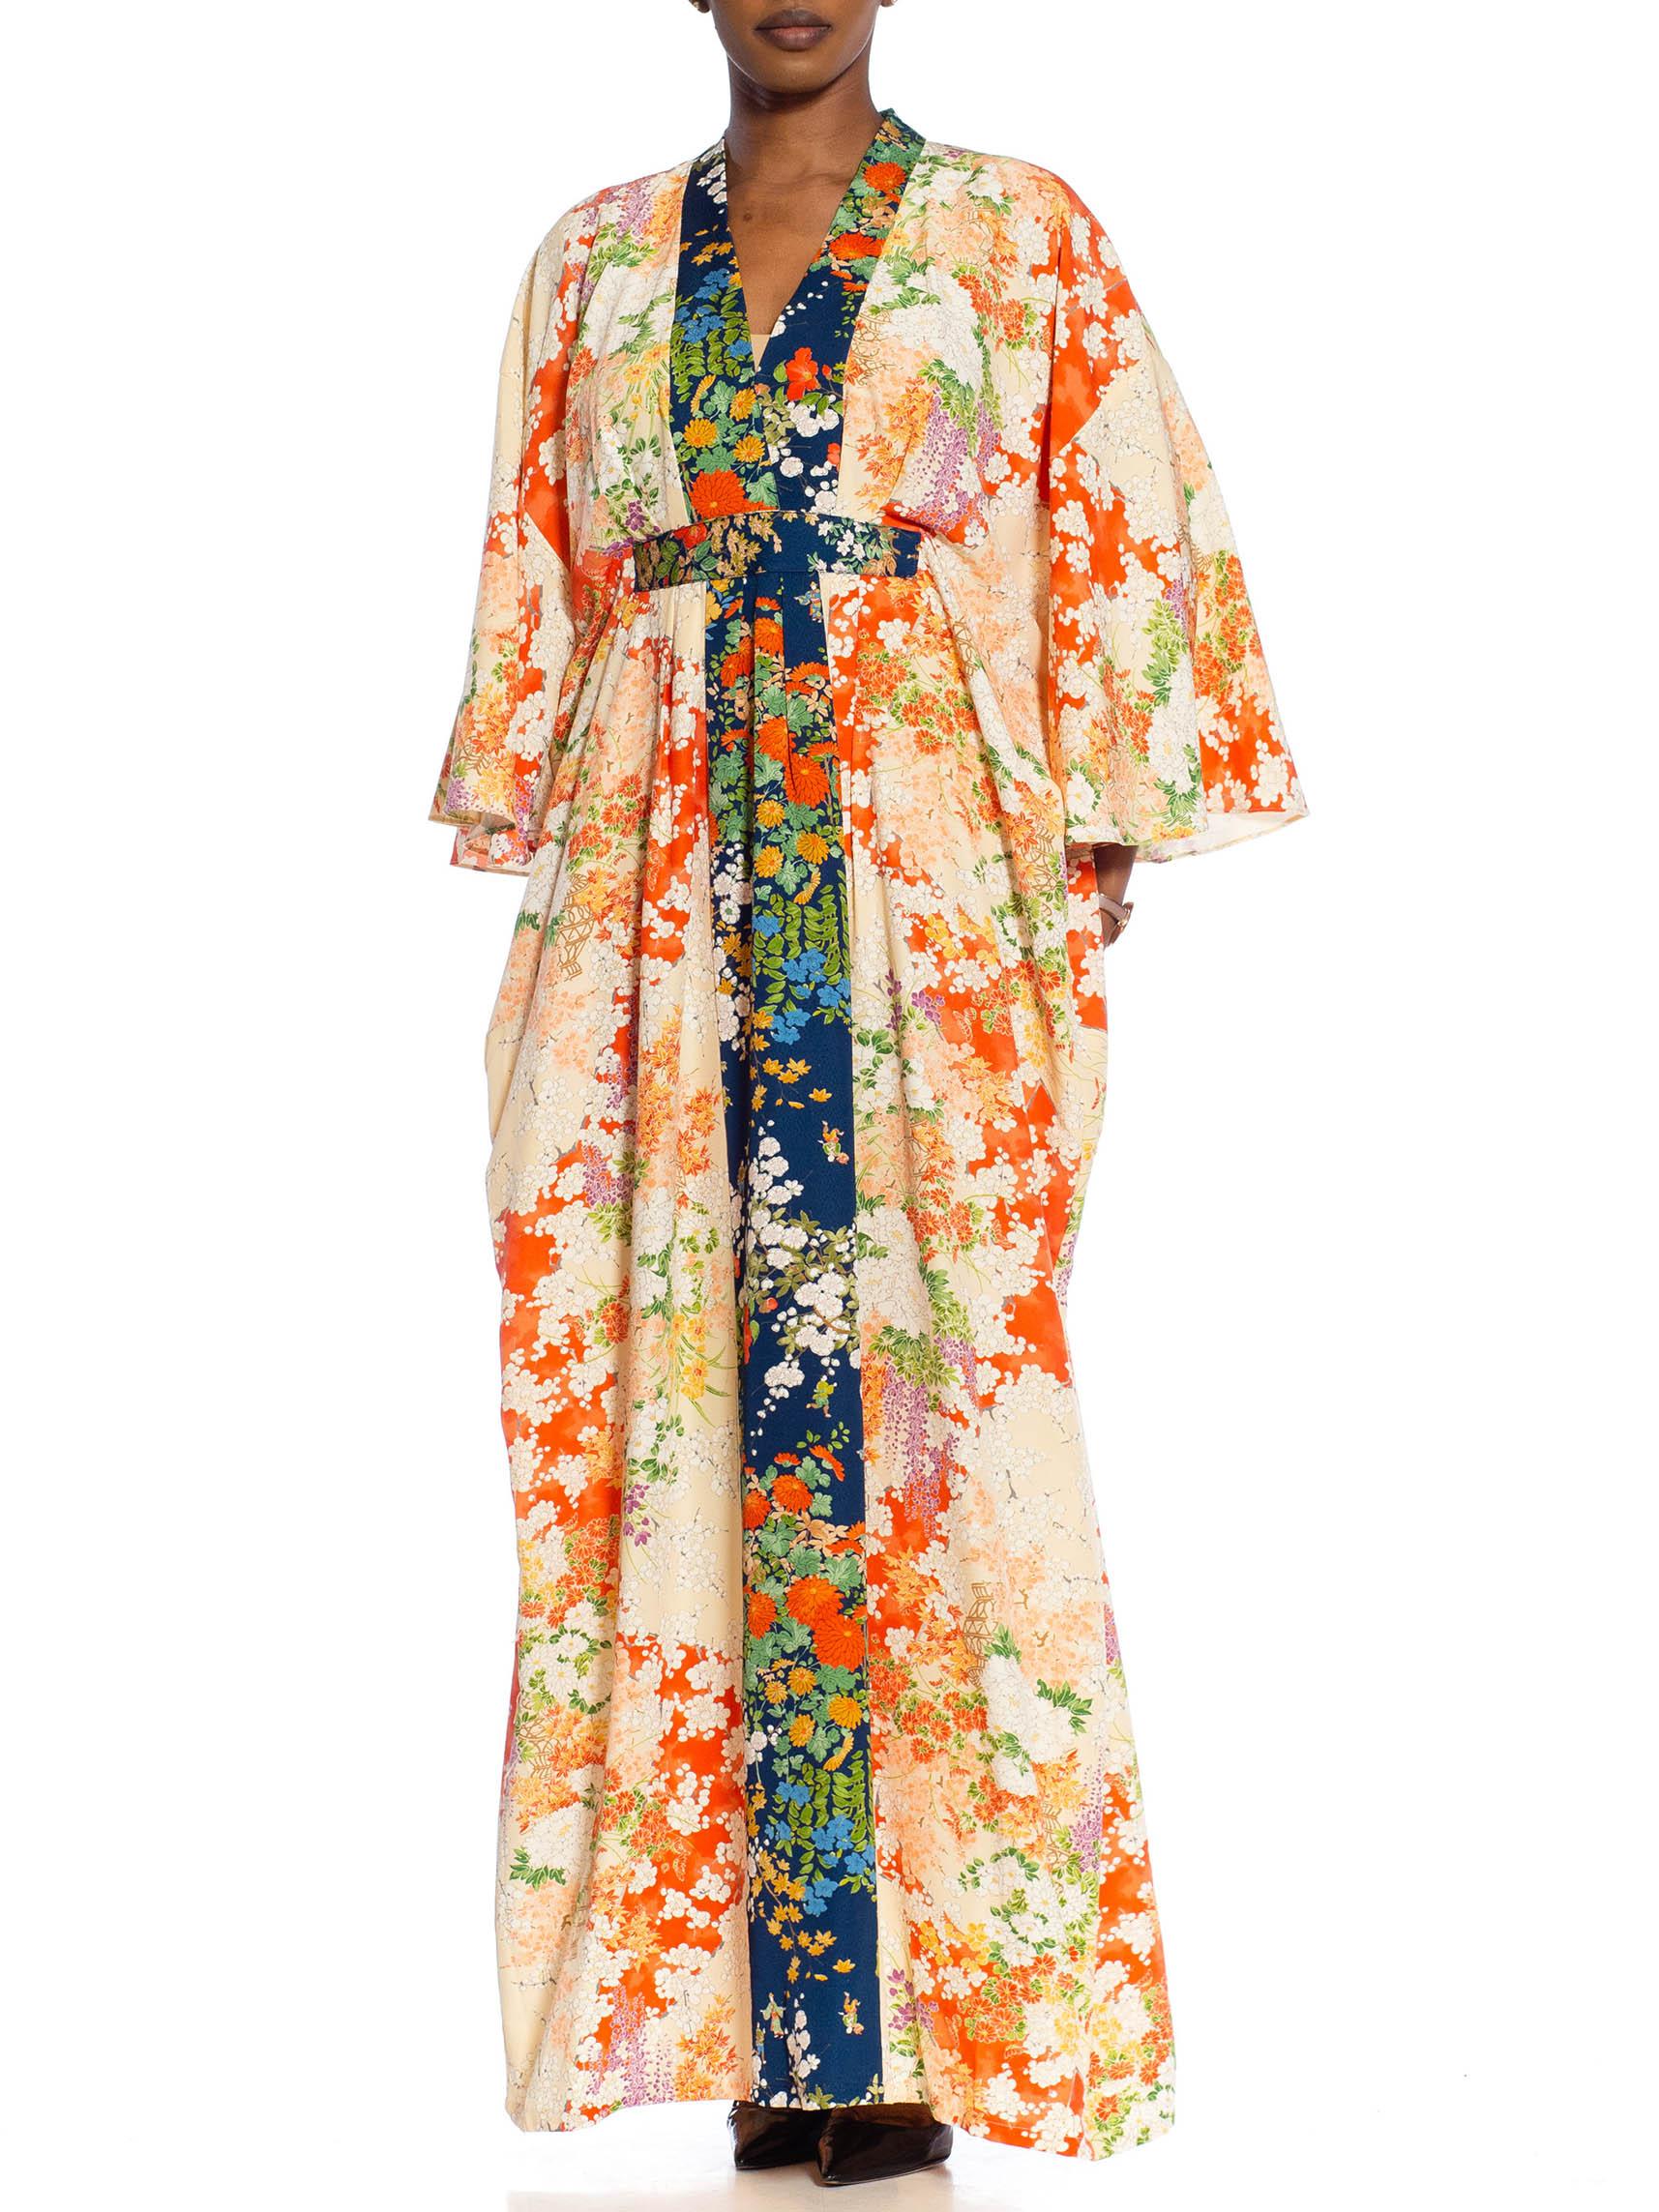 MORPHEW COLLECTION Orange & White Japanese Kimono Silk Floral Kaftan With Dark  In Excellent Condition For Sale In New York, NY